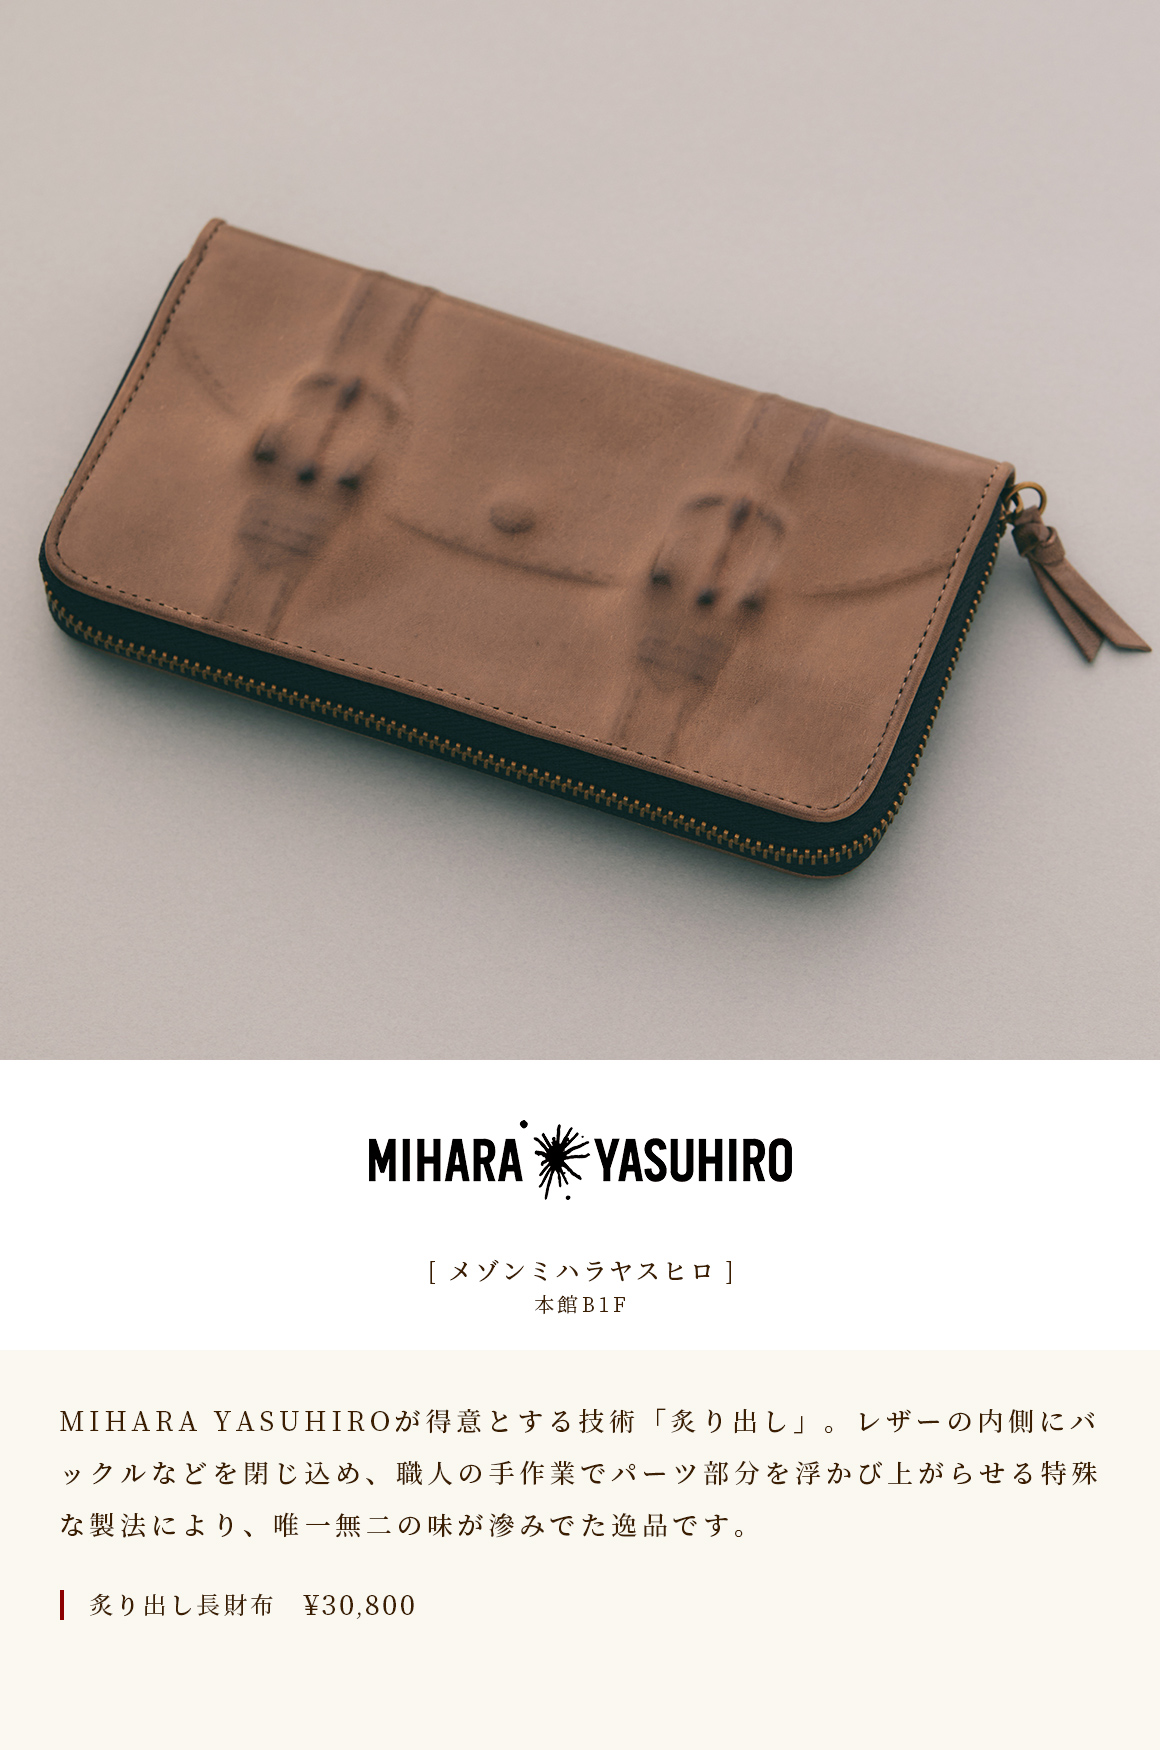 [Maison Mihara Yasuhiro] Main Building B1F MIHARA YASUHIRO's specialty is "Aburidashi". With a special manufacturing method that encloses buckles inside the leather and makes the parts stand out by hand by craftsmen, it is a gem with a unique taste. Aburidashi wallet ￥ 30,800